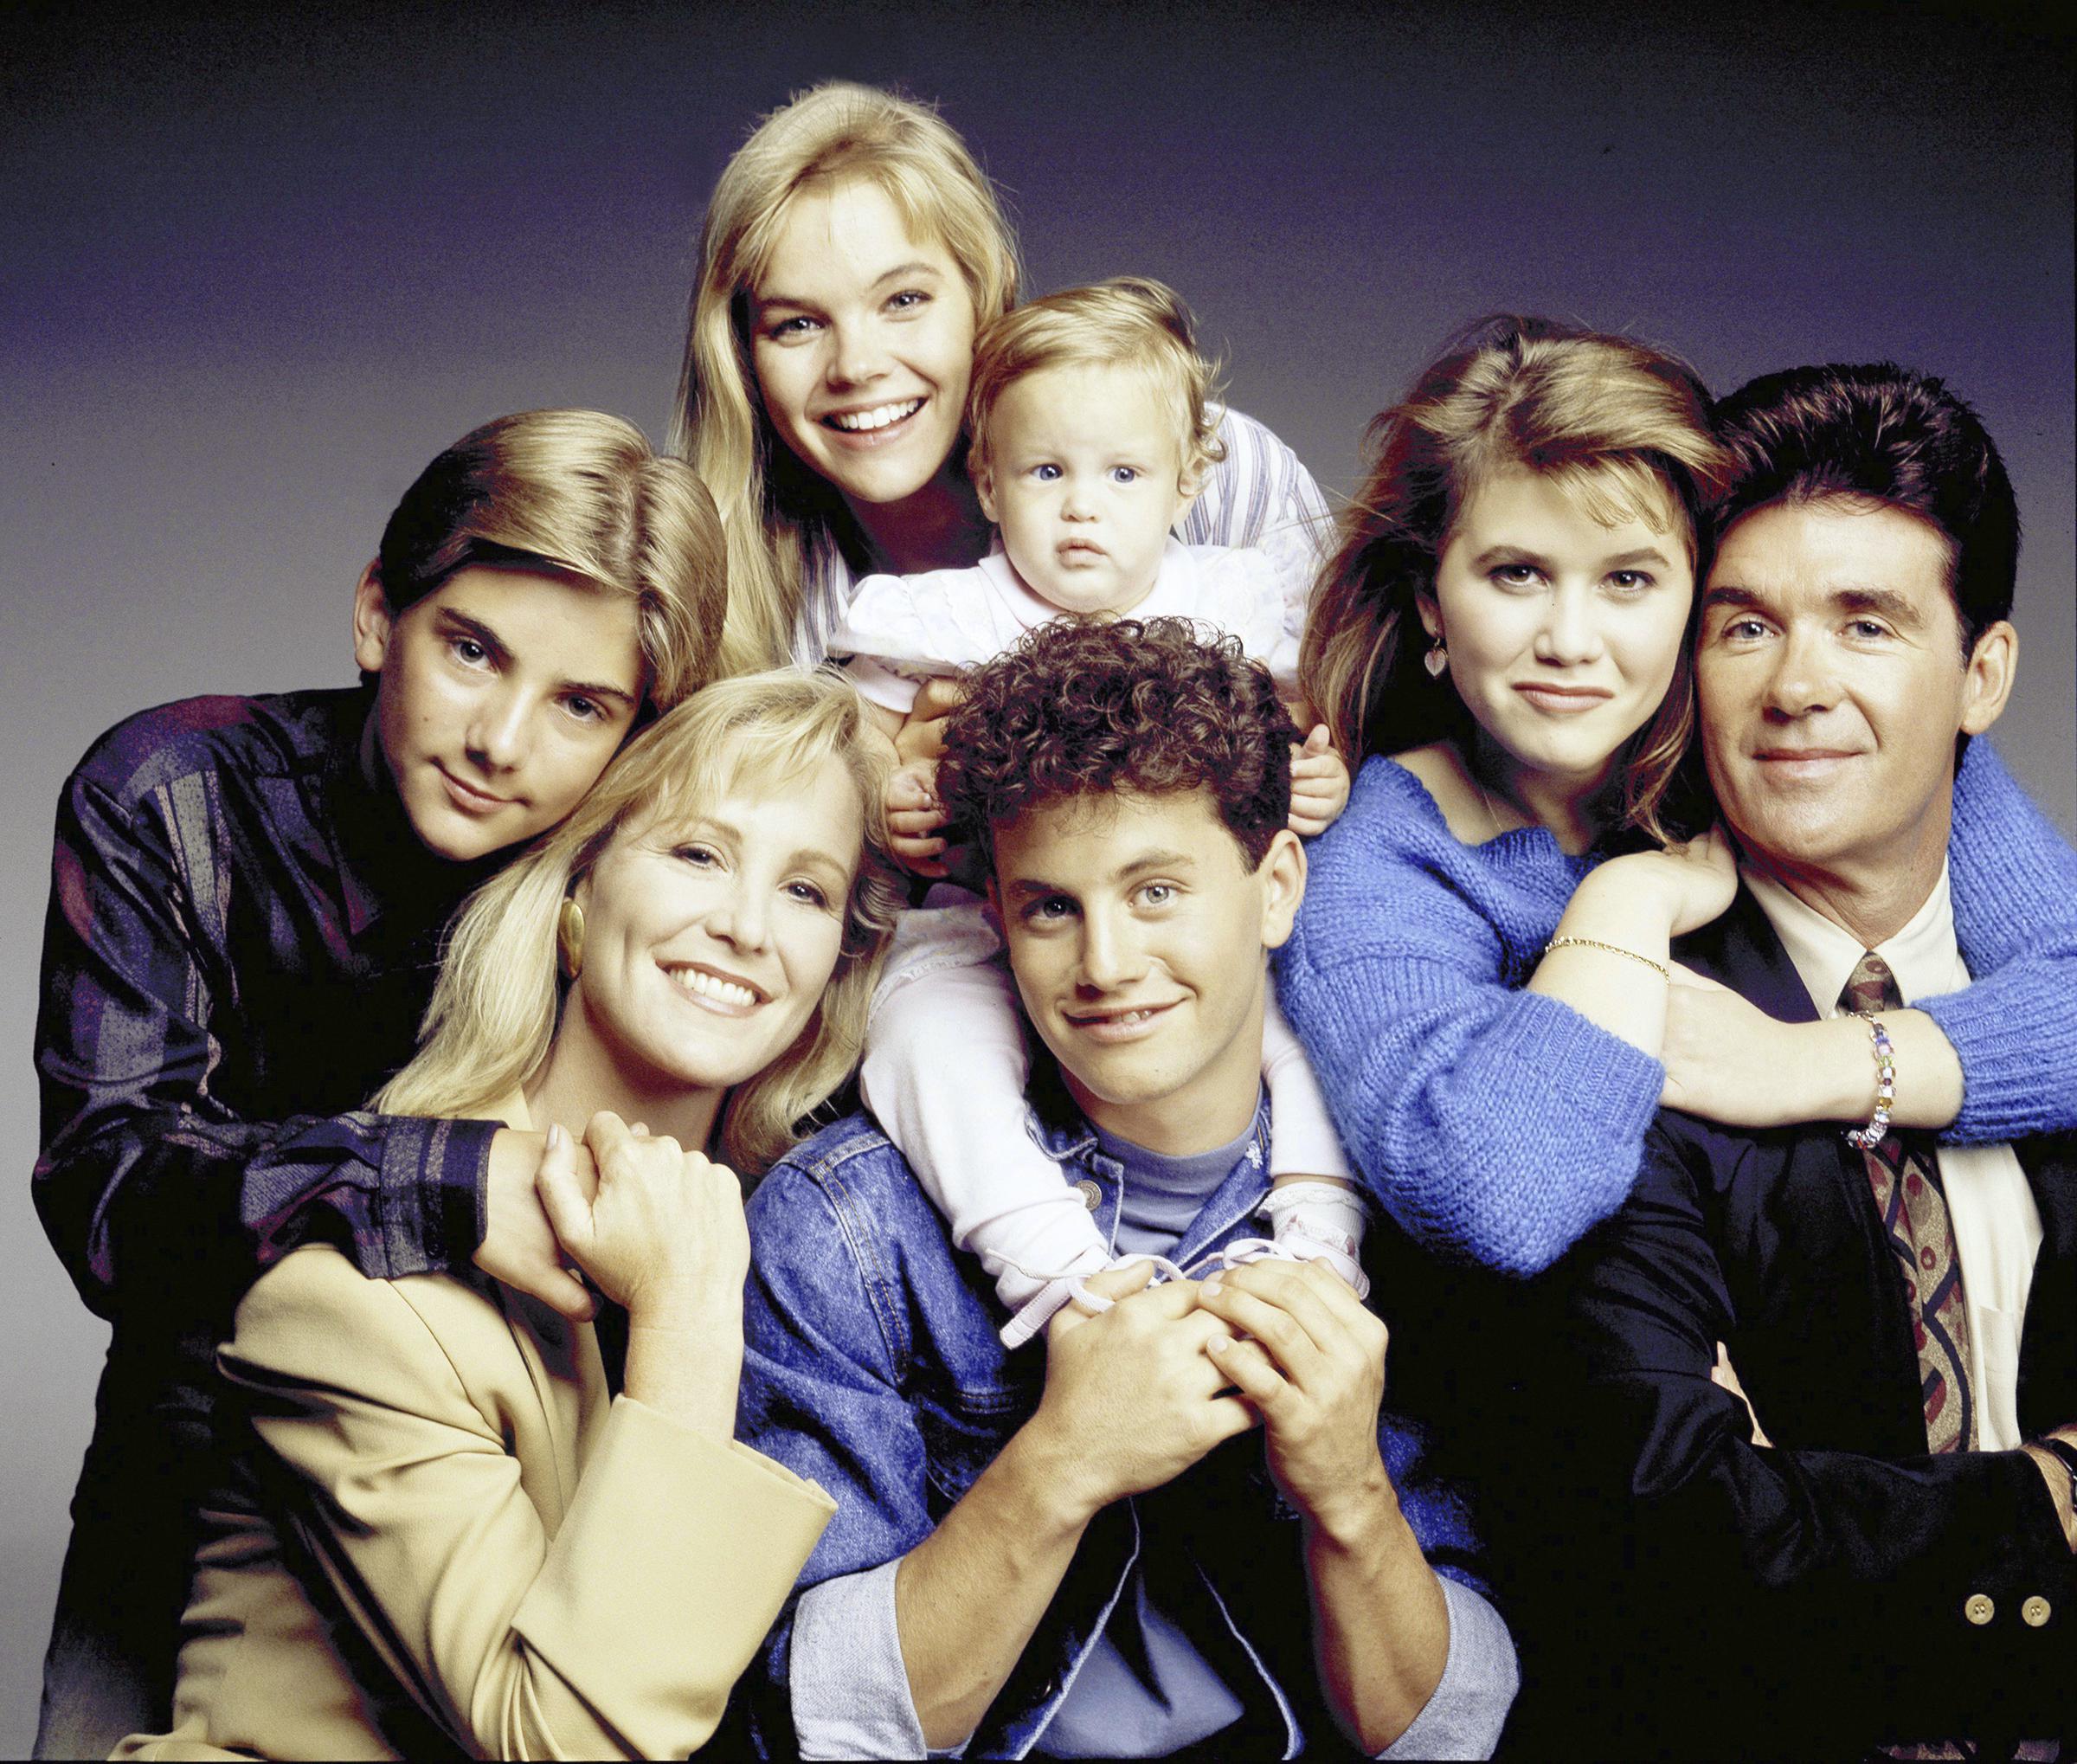 Tracey Gold and the cast of season 5 of "Growing Pains." | Source: Getty Images